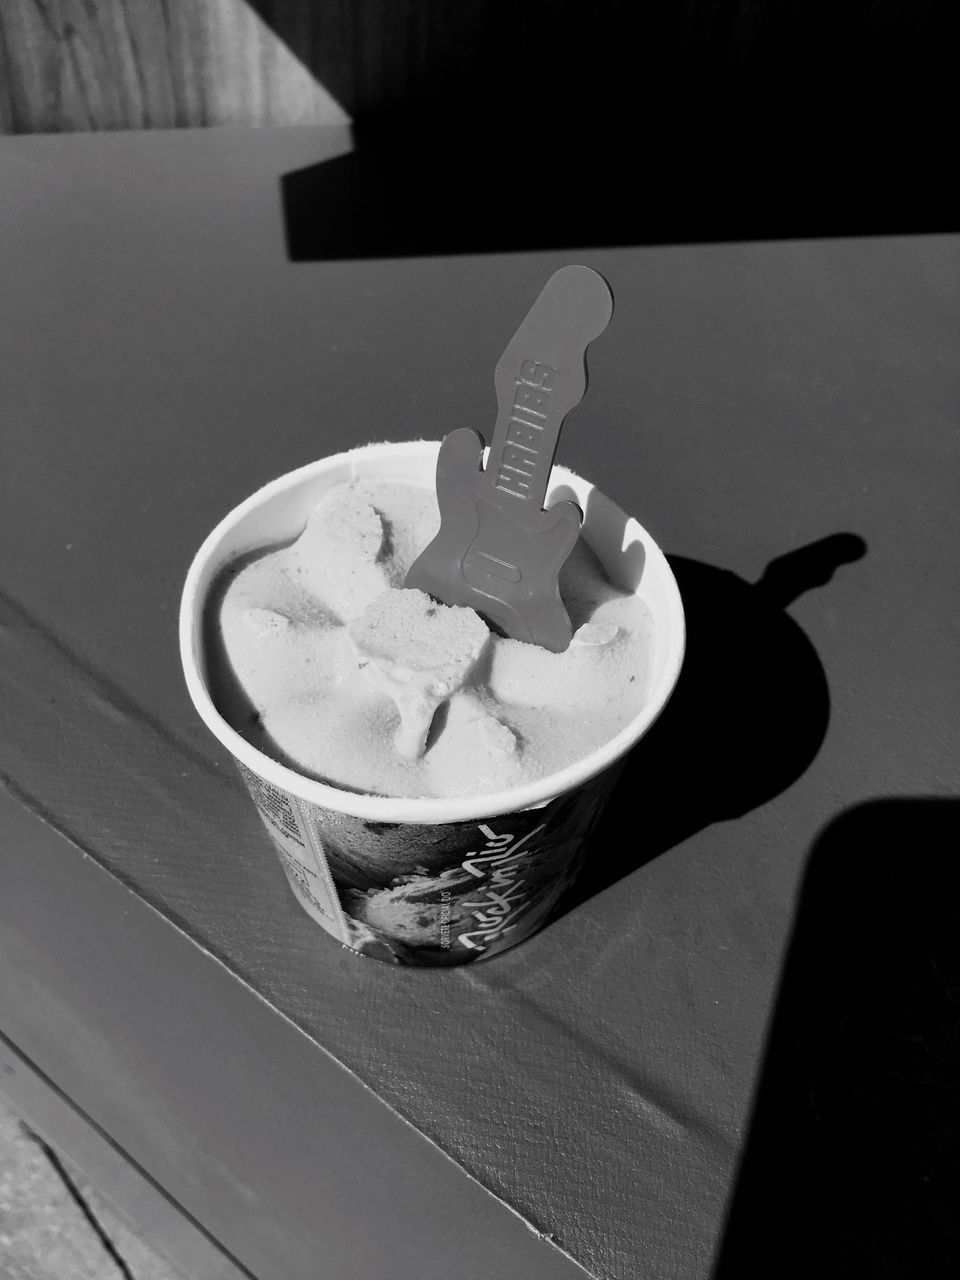 HIGH ANGLE VIEW OF ICE CREAM IN CUP ON TABLE